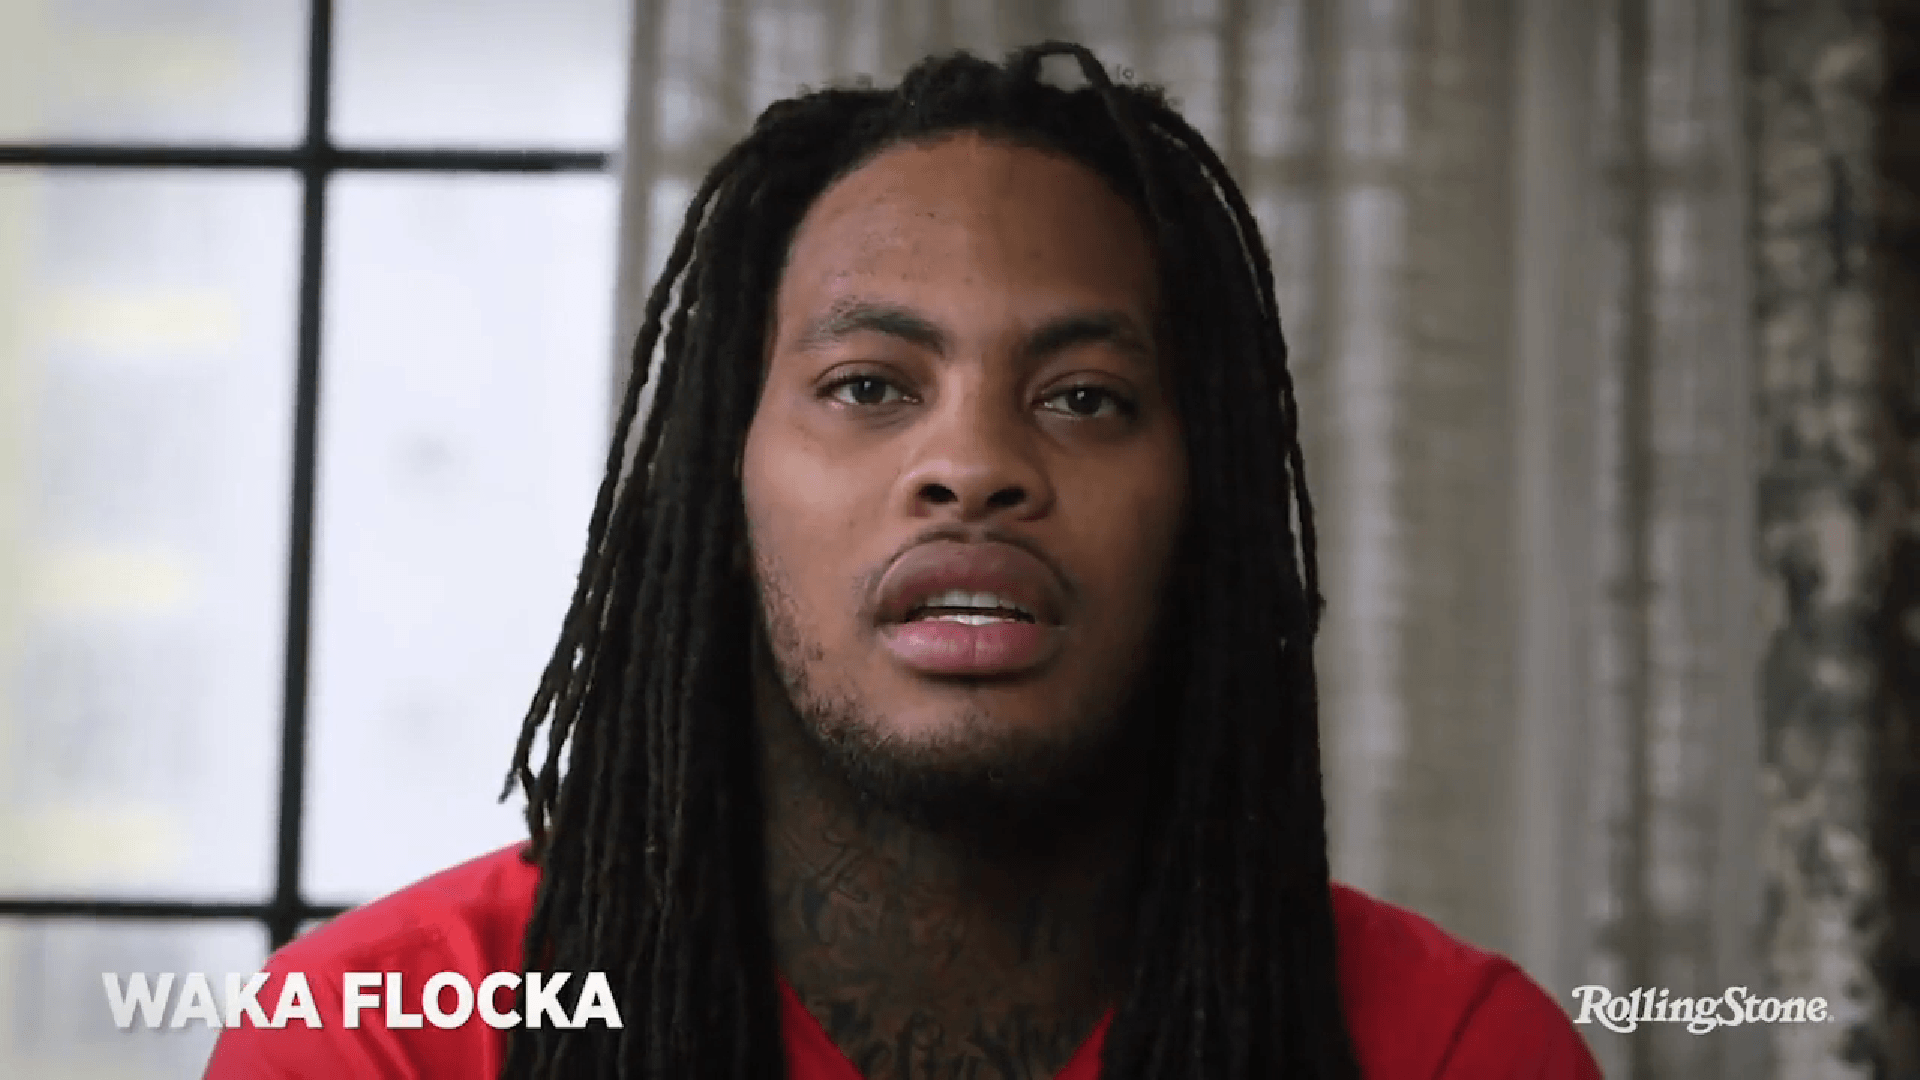 I interviewed an expert about Waka Flocka's presidential campaign